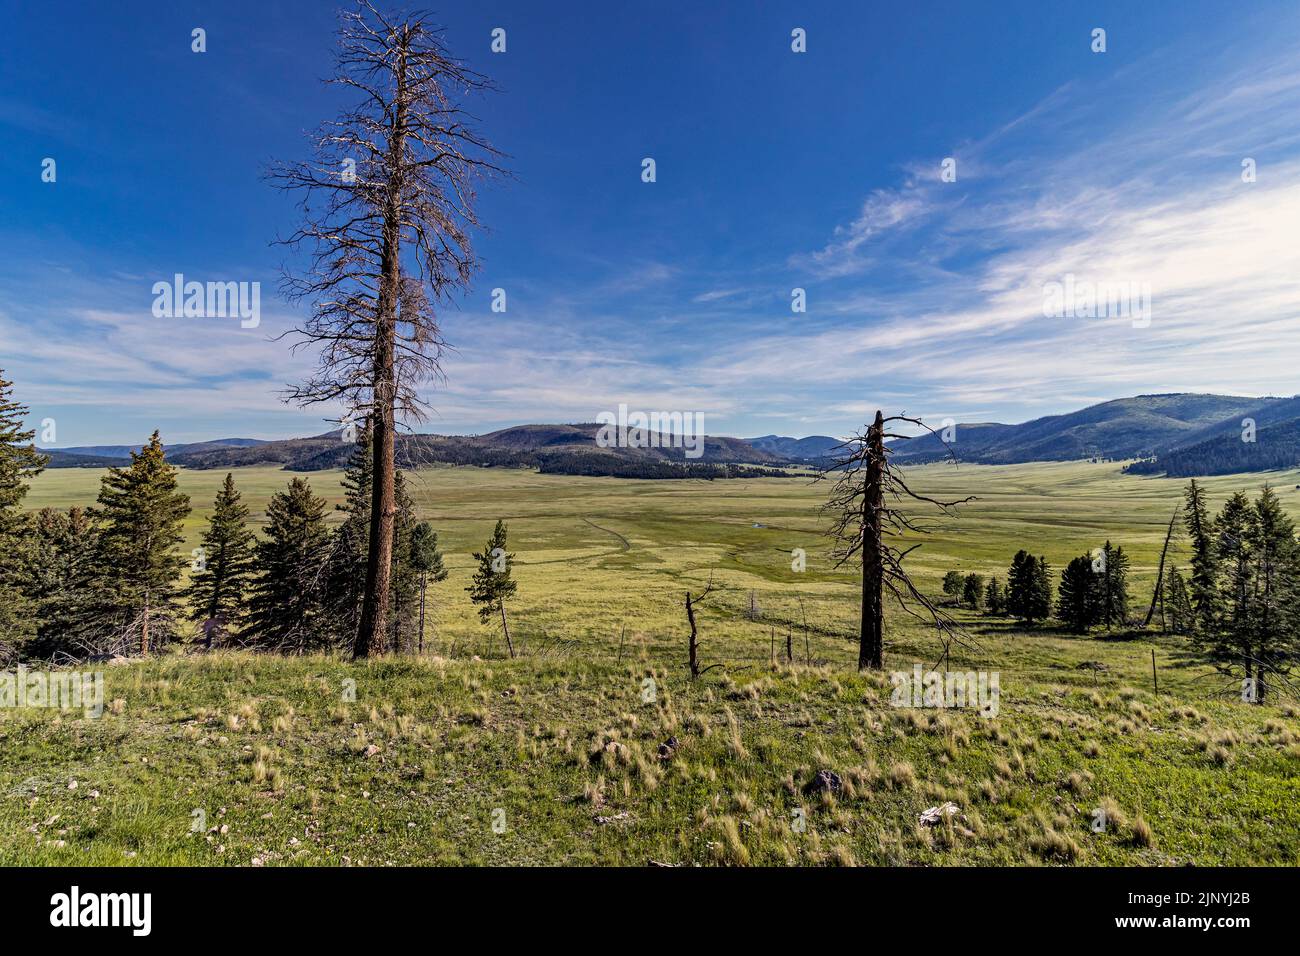 Landscape Image Of the Valles Caldera In New Mexico Stock Photo